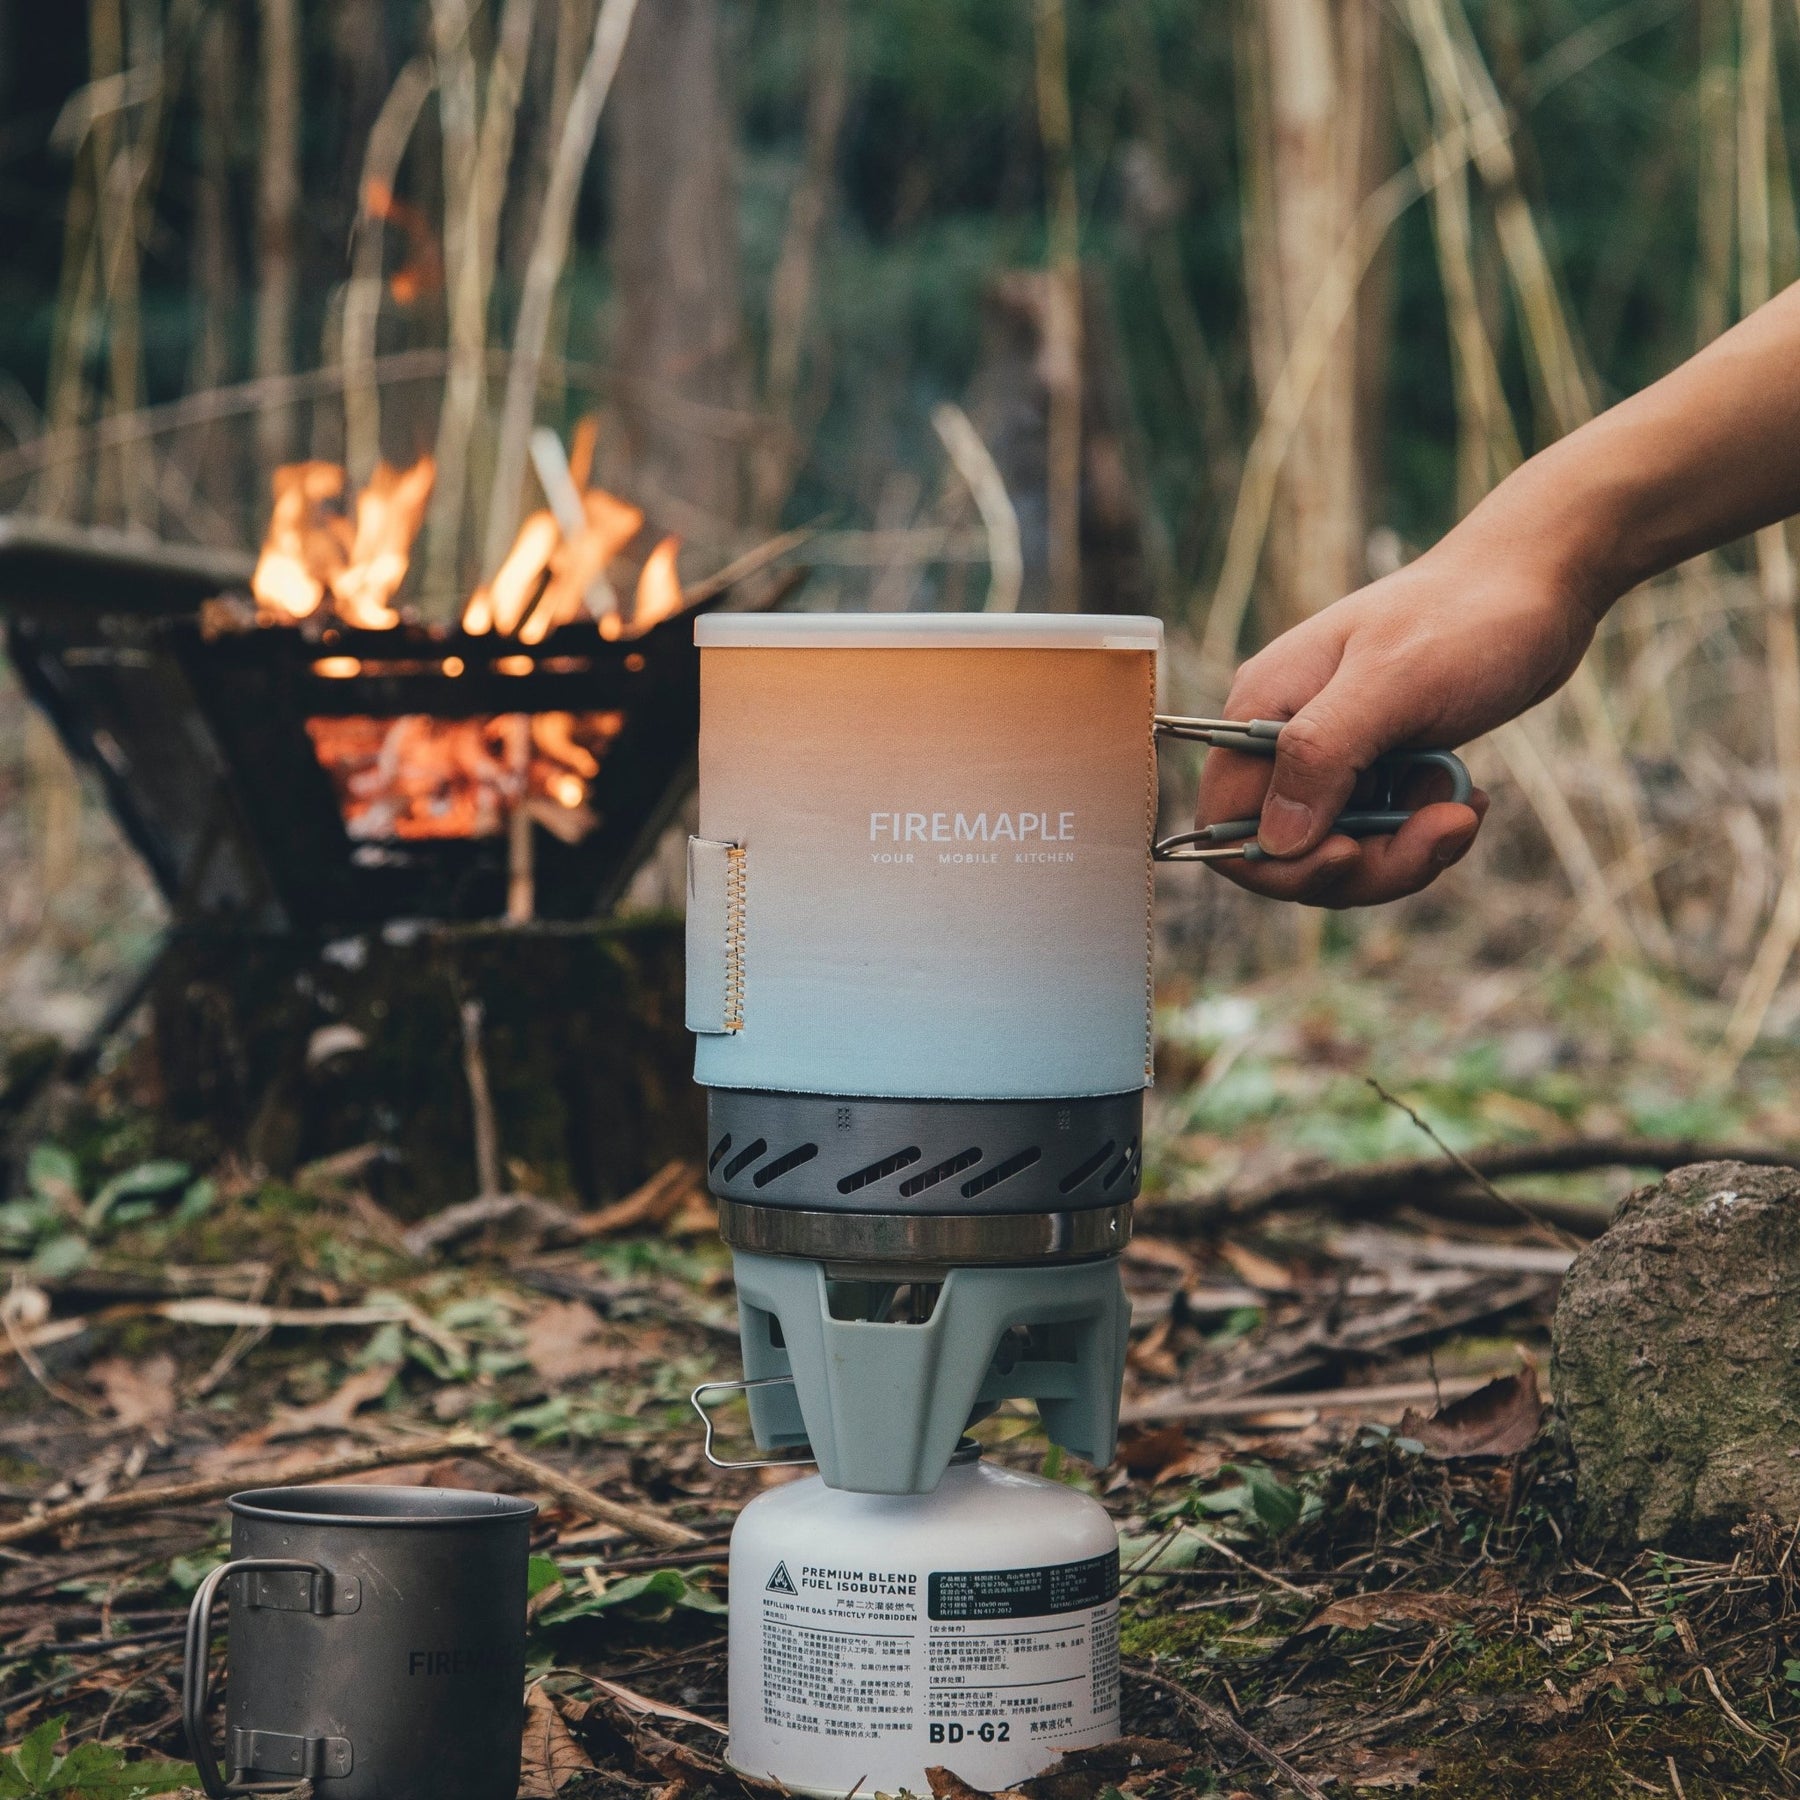 Fire Maple X1 Jetboil alt. Camping Stove